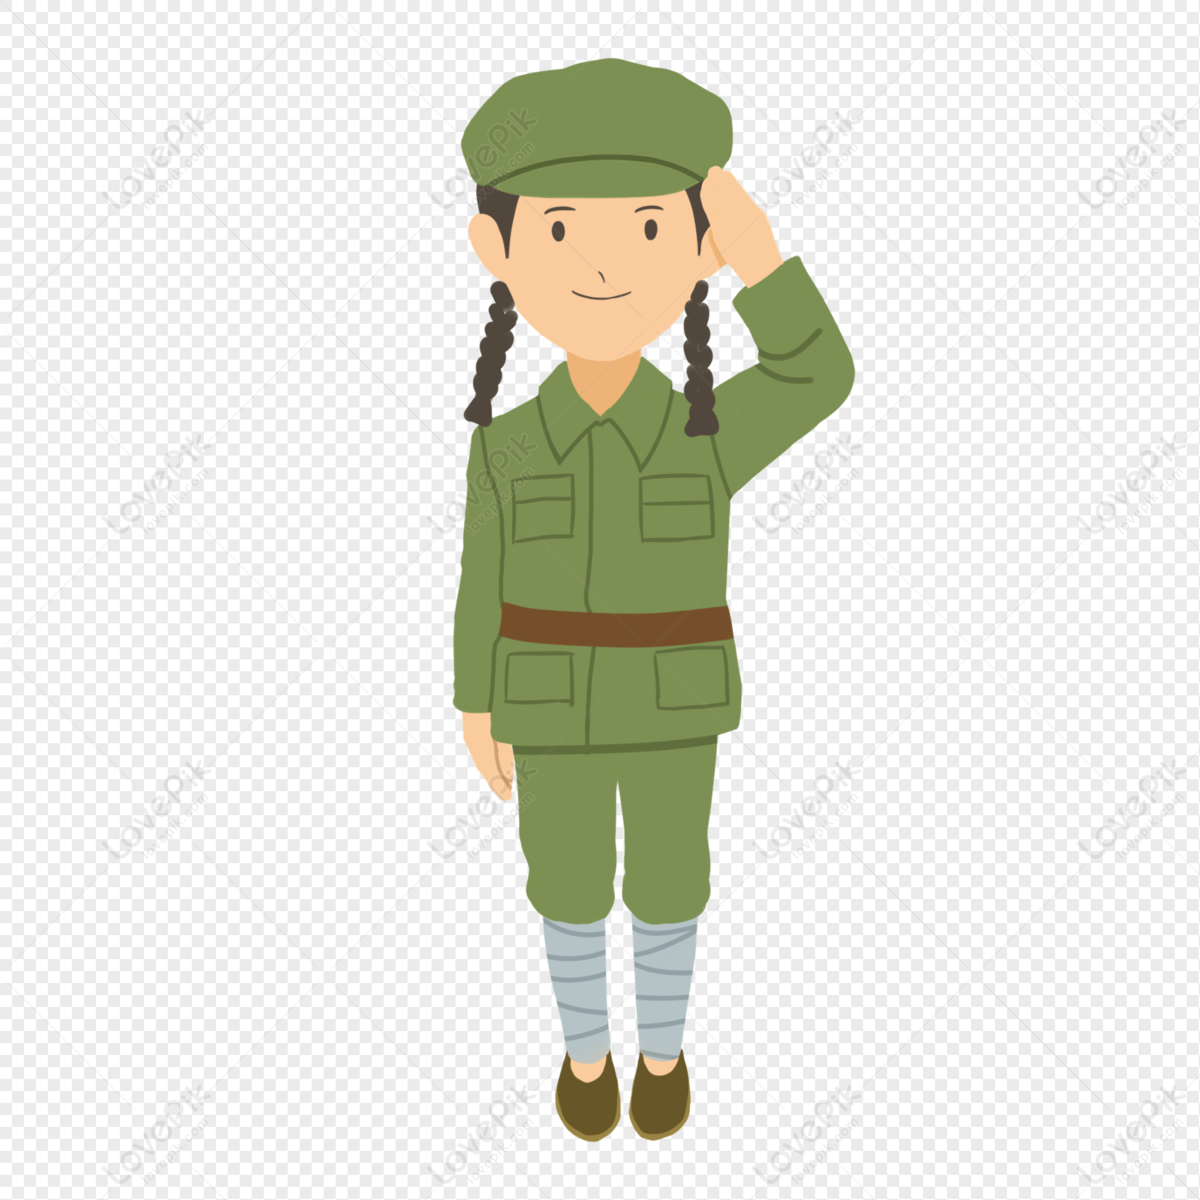 soldier salute clipart